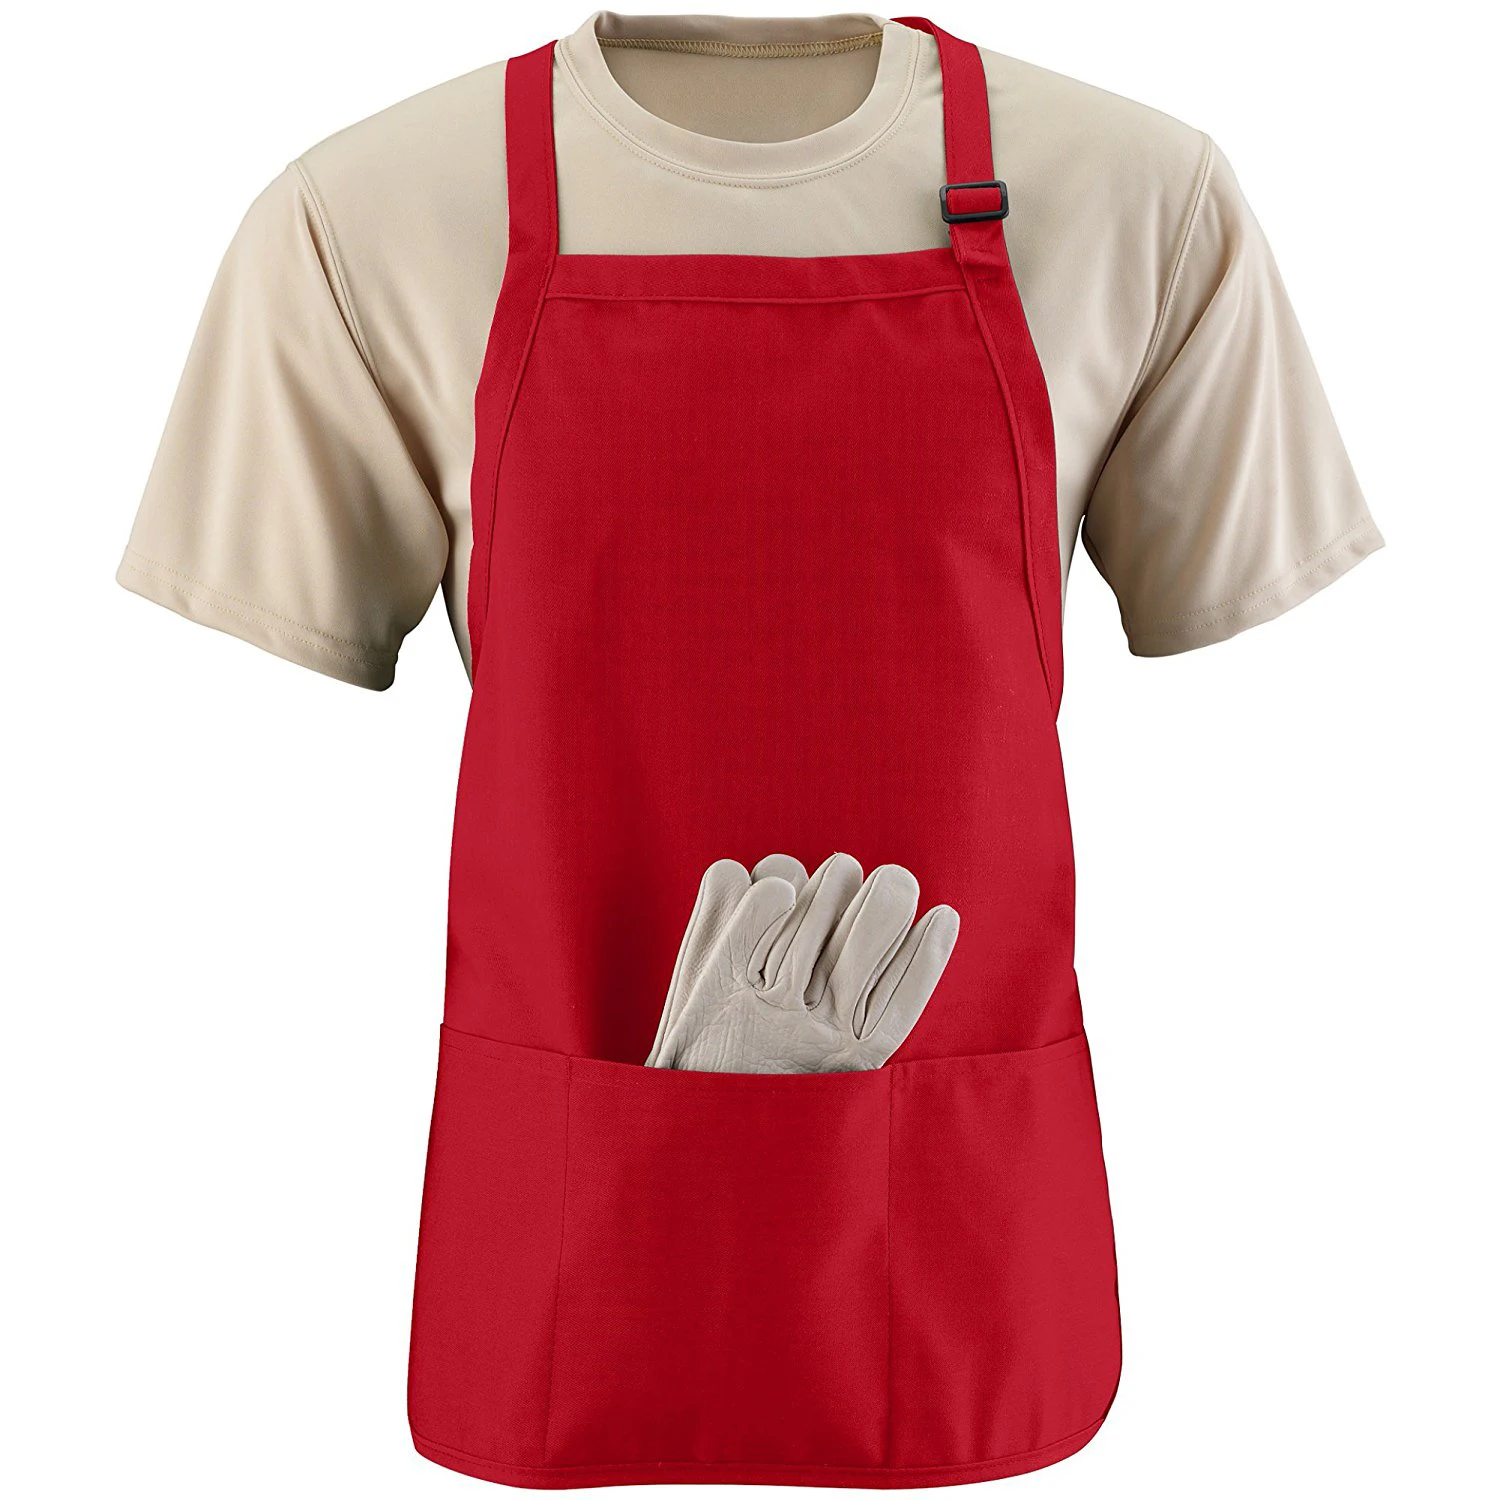 Professional Catering Butchers Bib Apron 100% Cotton Woven Stripe with Pocket 